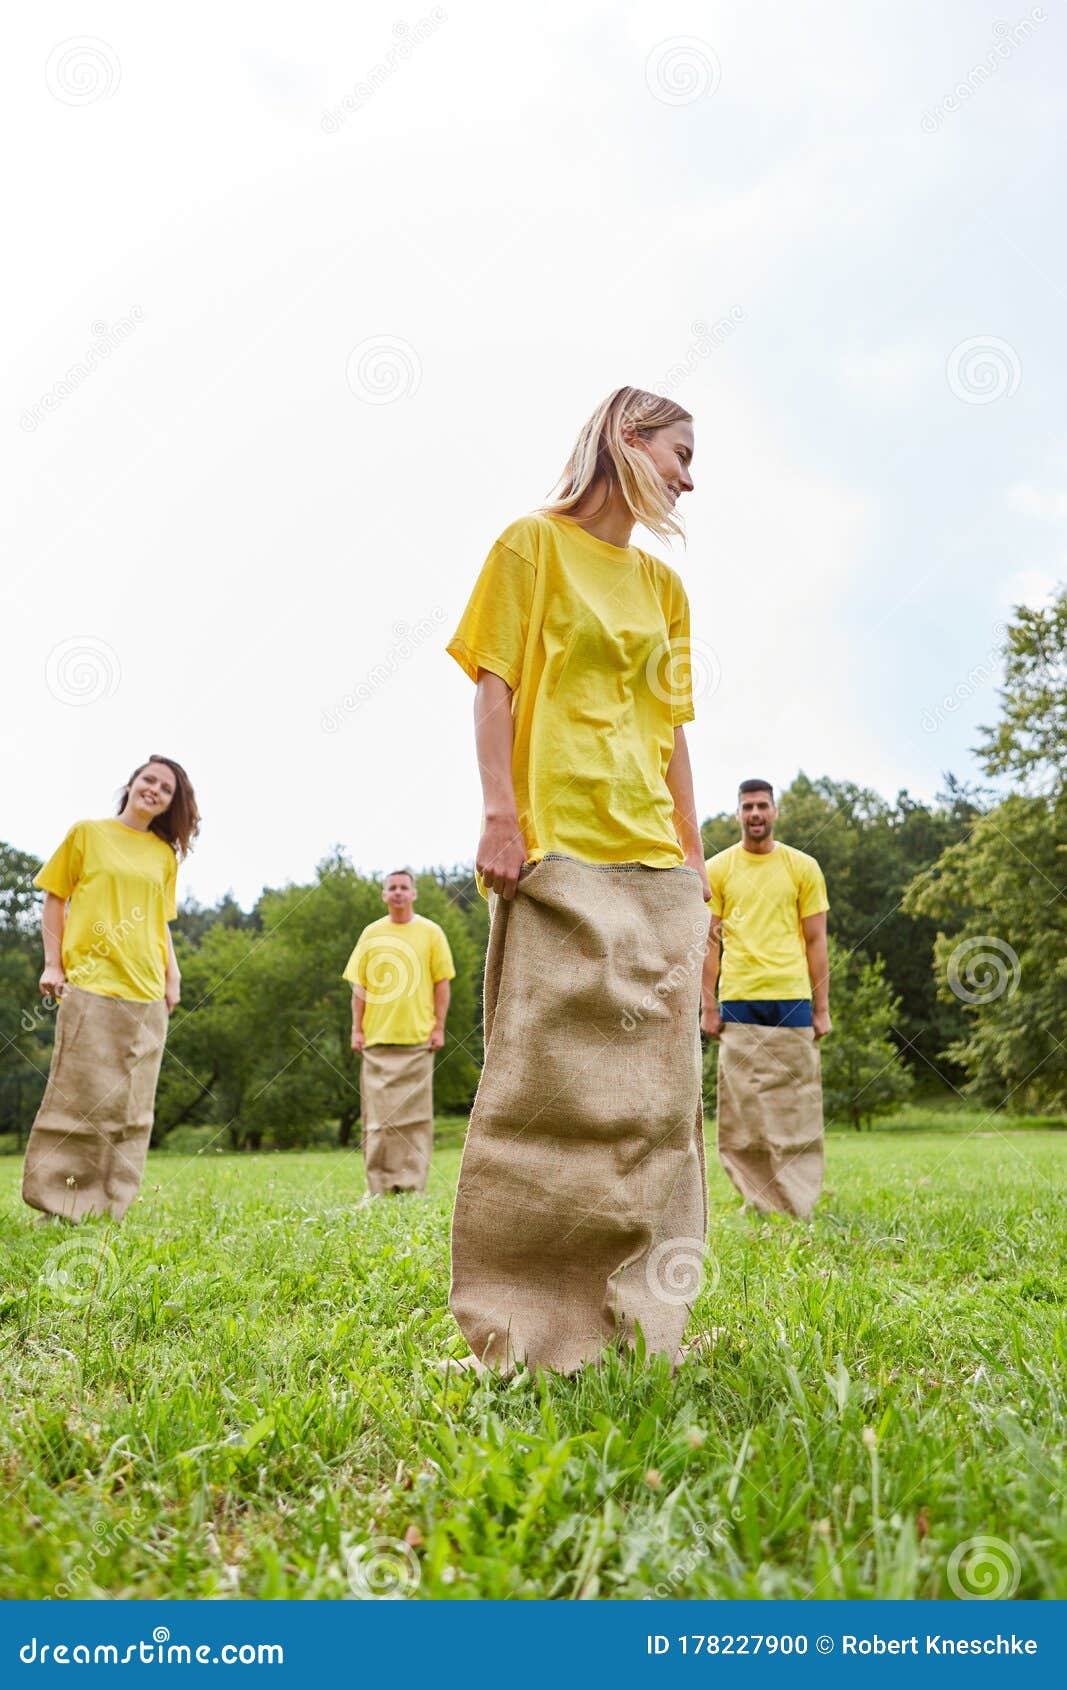 Sporting Team at the Sack Race Stock Photo - Image of competition ...